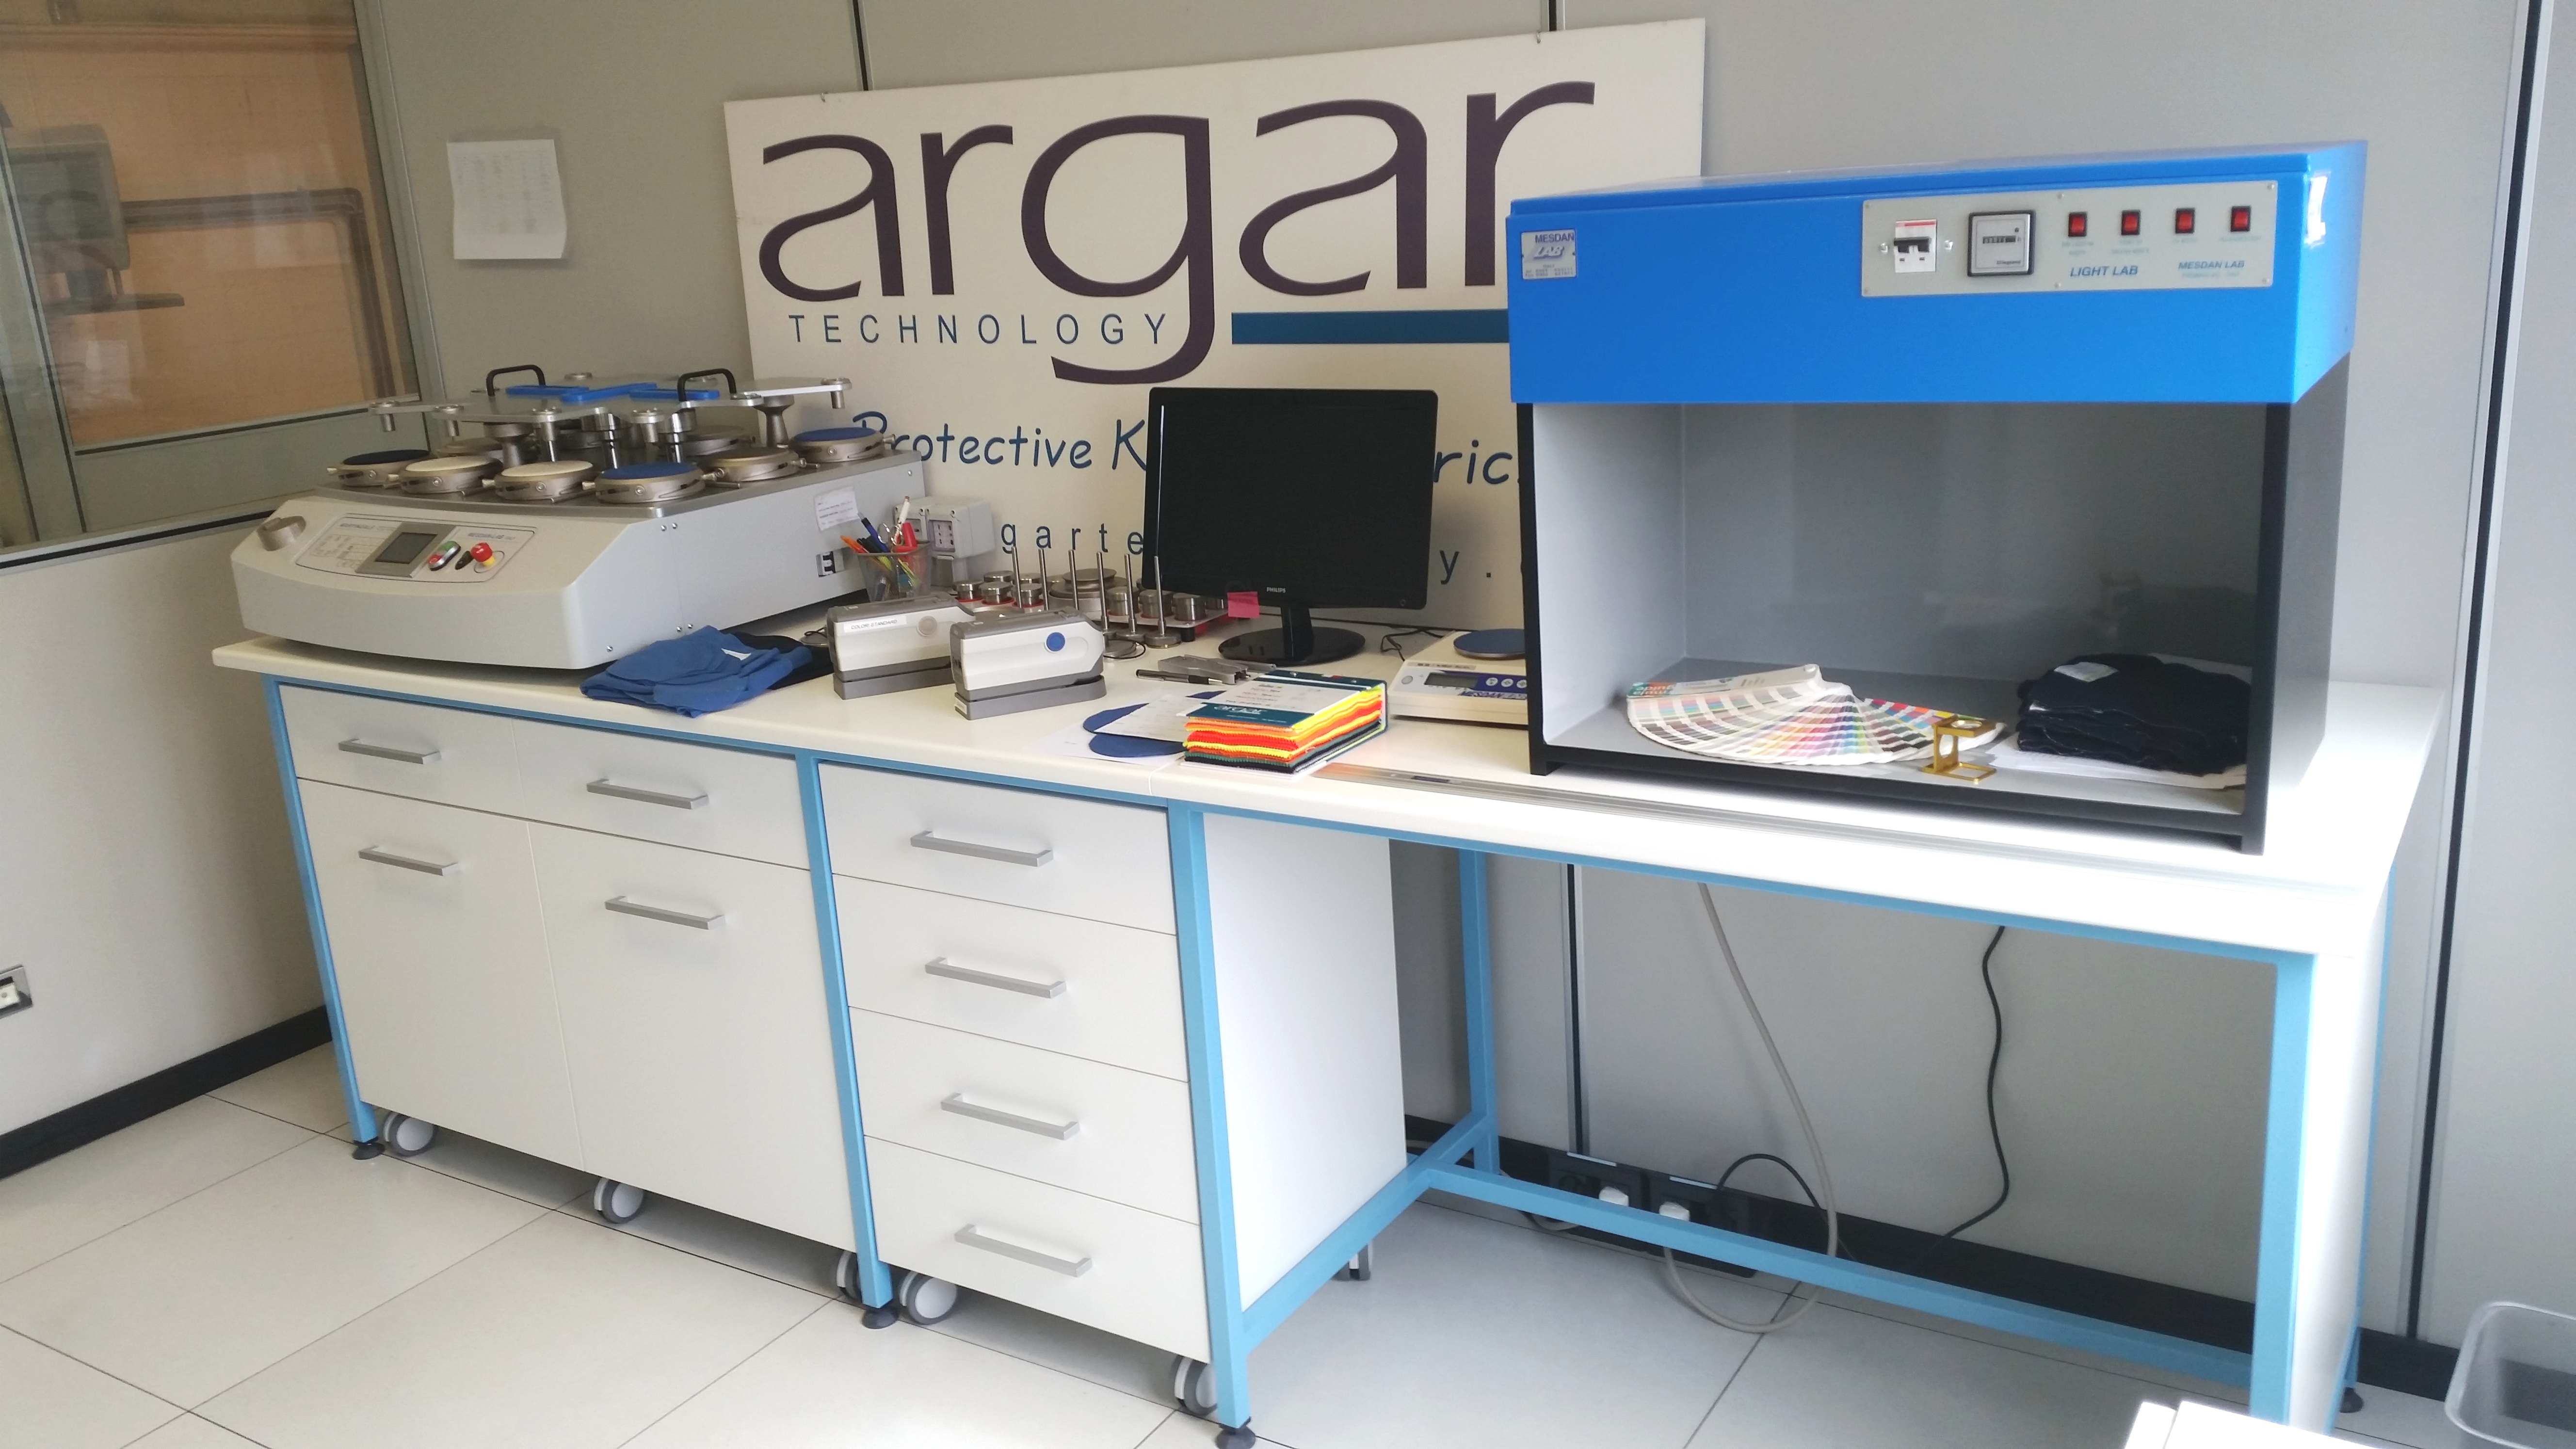 The company manufactures a wide range of single and double knit fabrics and accessories for personal protective equipment (PPE) markets. © Argar Technology 